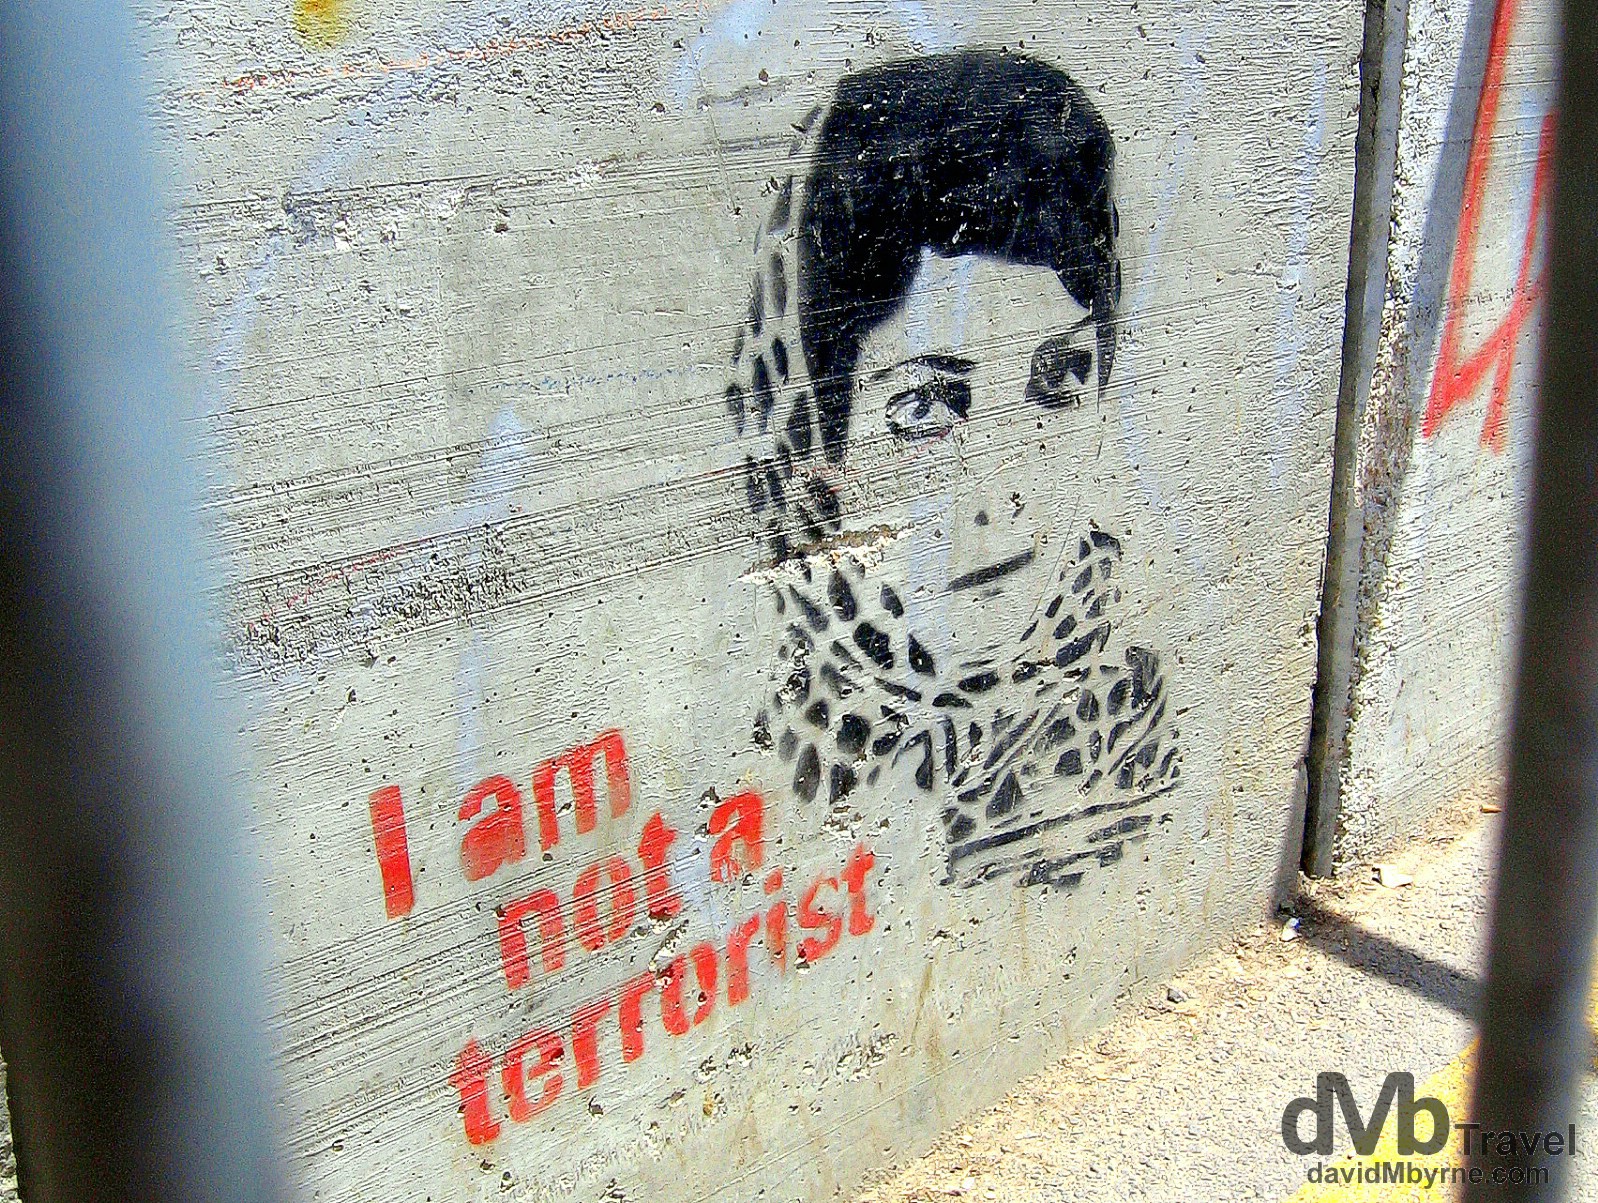 I am not a terrorist. A section of the heavily guarded wall separating the Palestinian West Back from Israel. May 2, 2008. 